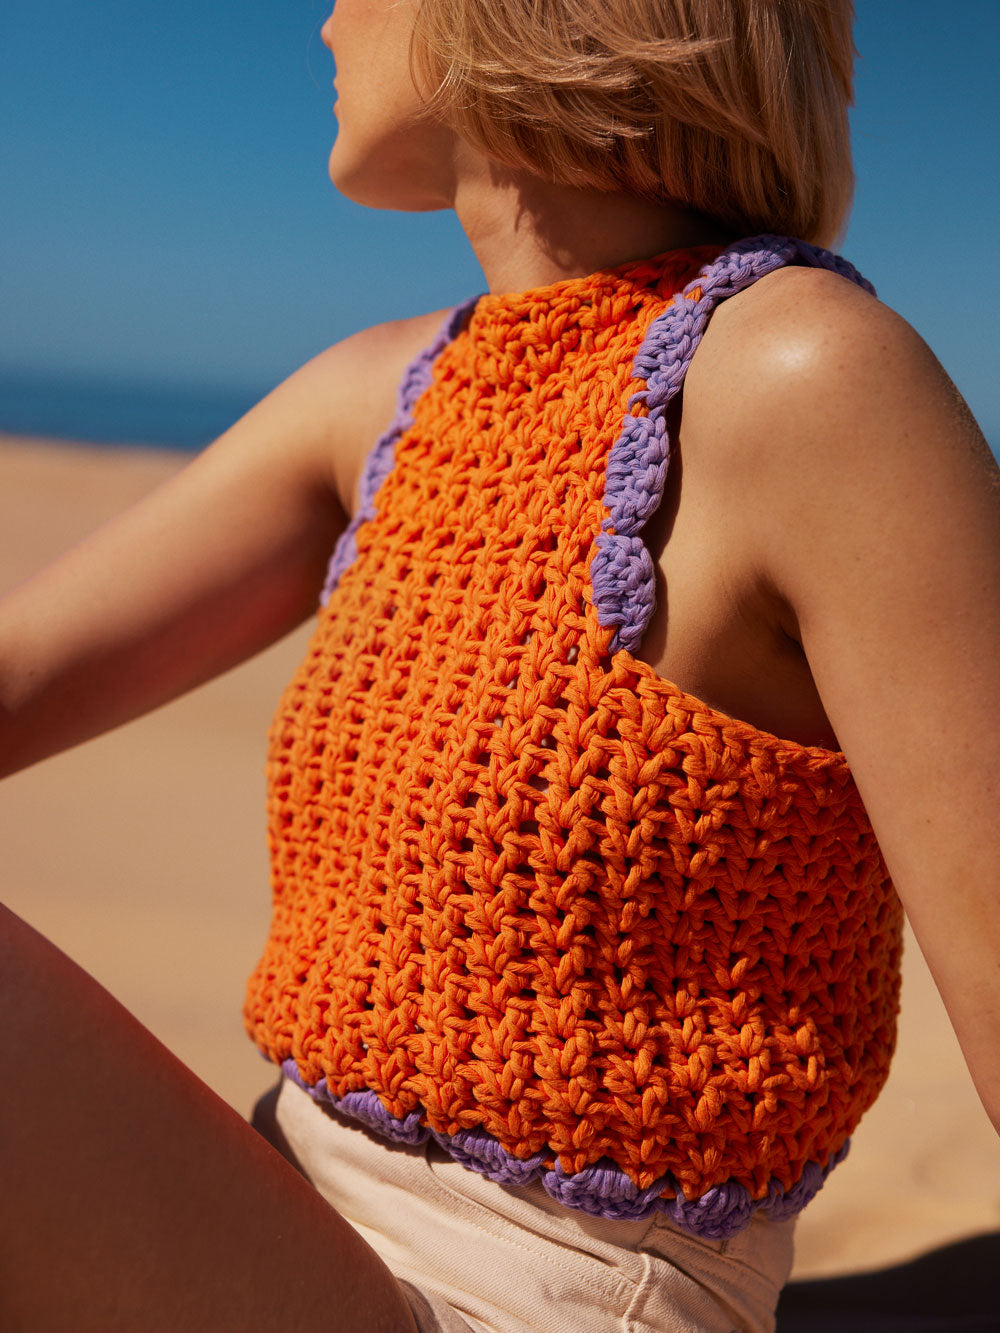 Learn to Crochet the Meadow Tank with Cardigang